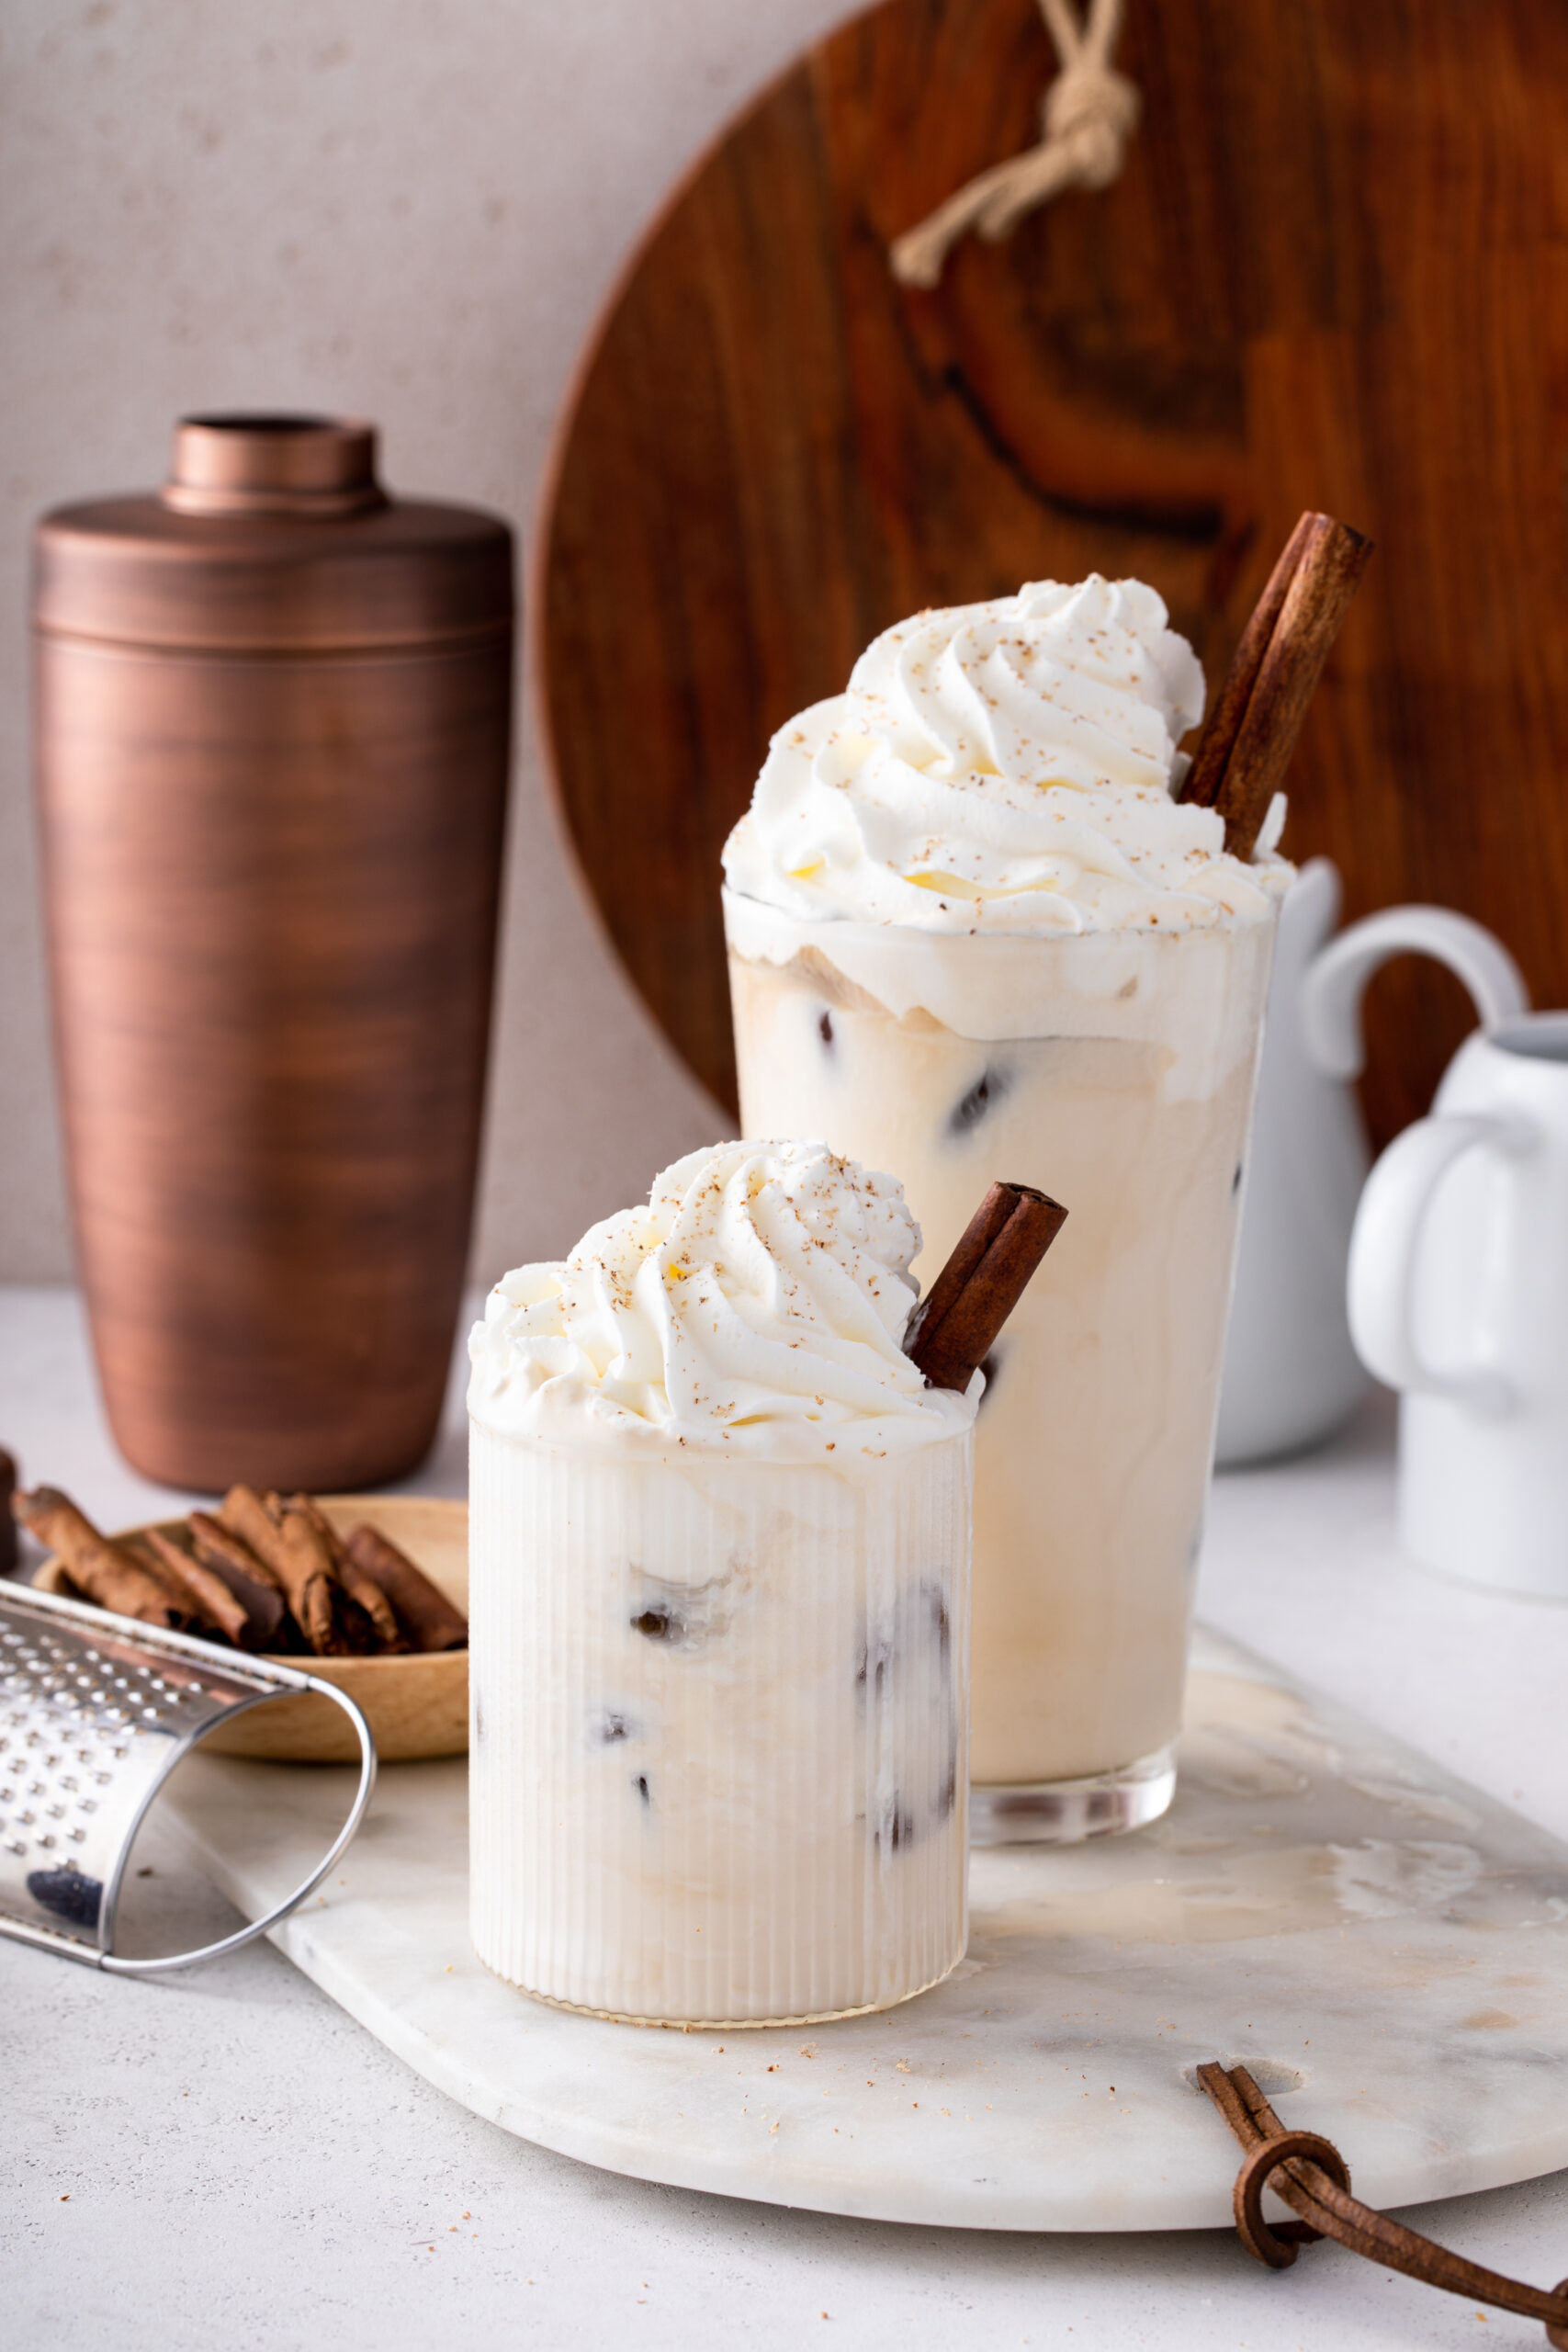 Who doesn't love a great Iced Coffee drink? Even better when it is a bit spiked, am I right? Click HERE to make the best spiked Iced Coffee recipe ever!